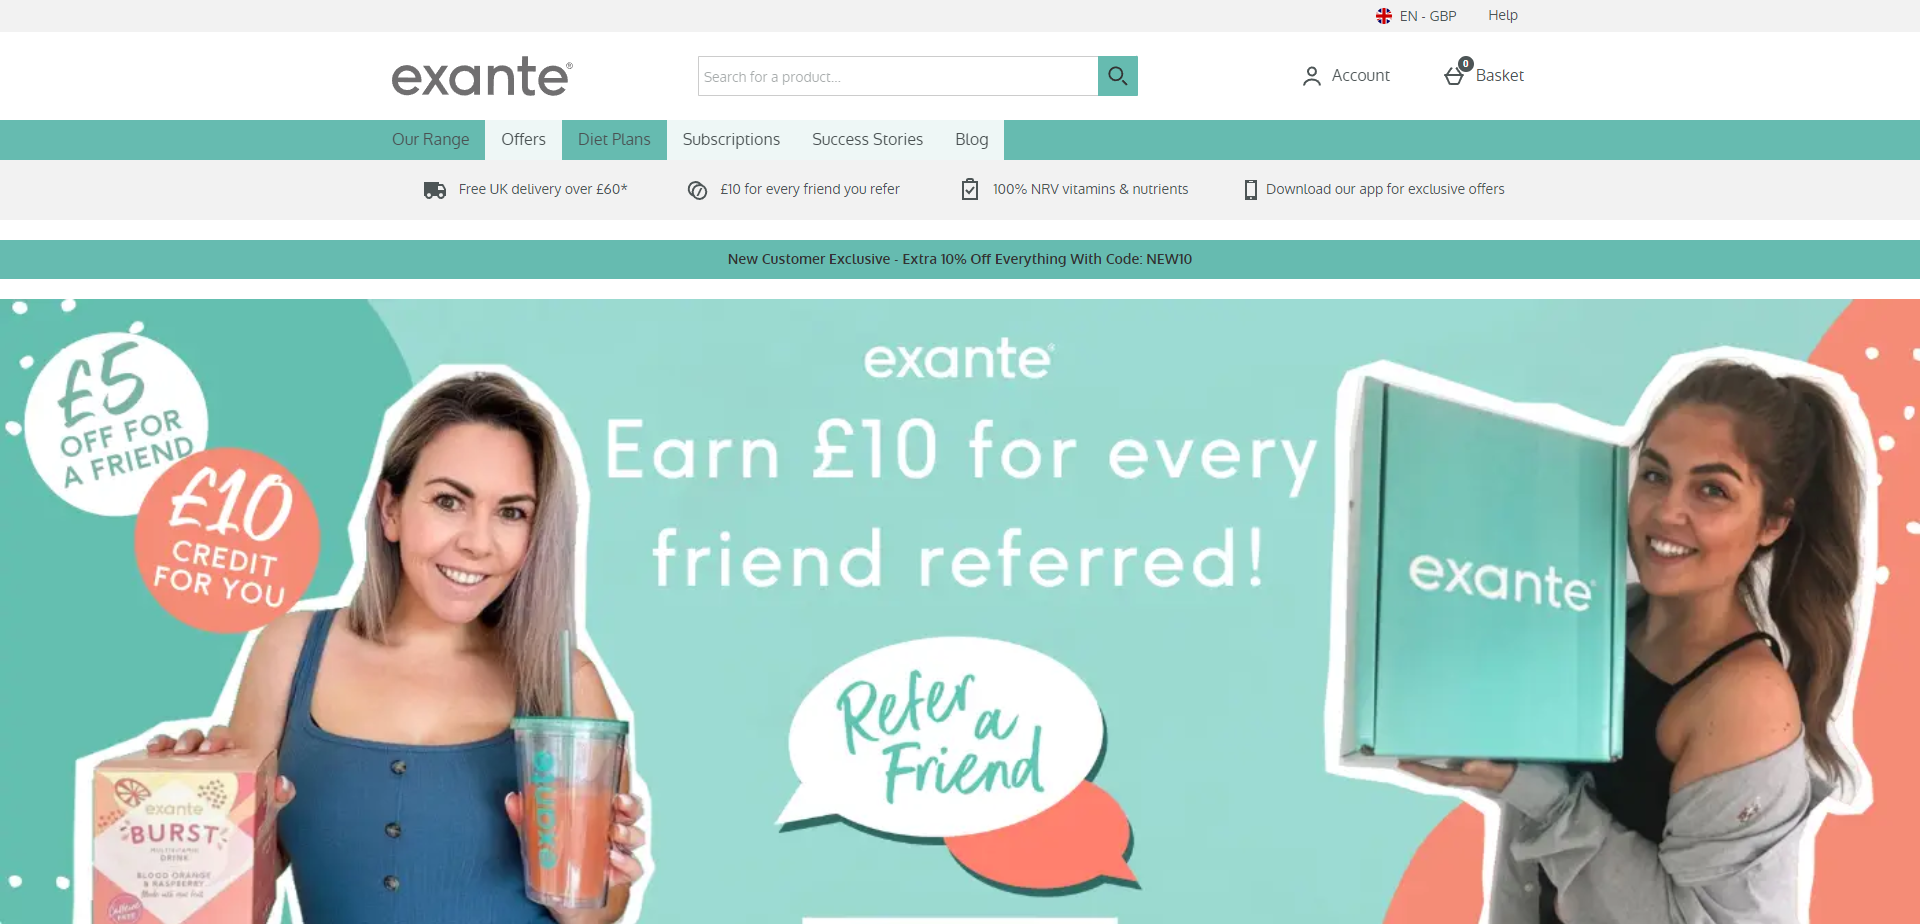 Landing Page for Extante Diet